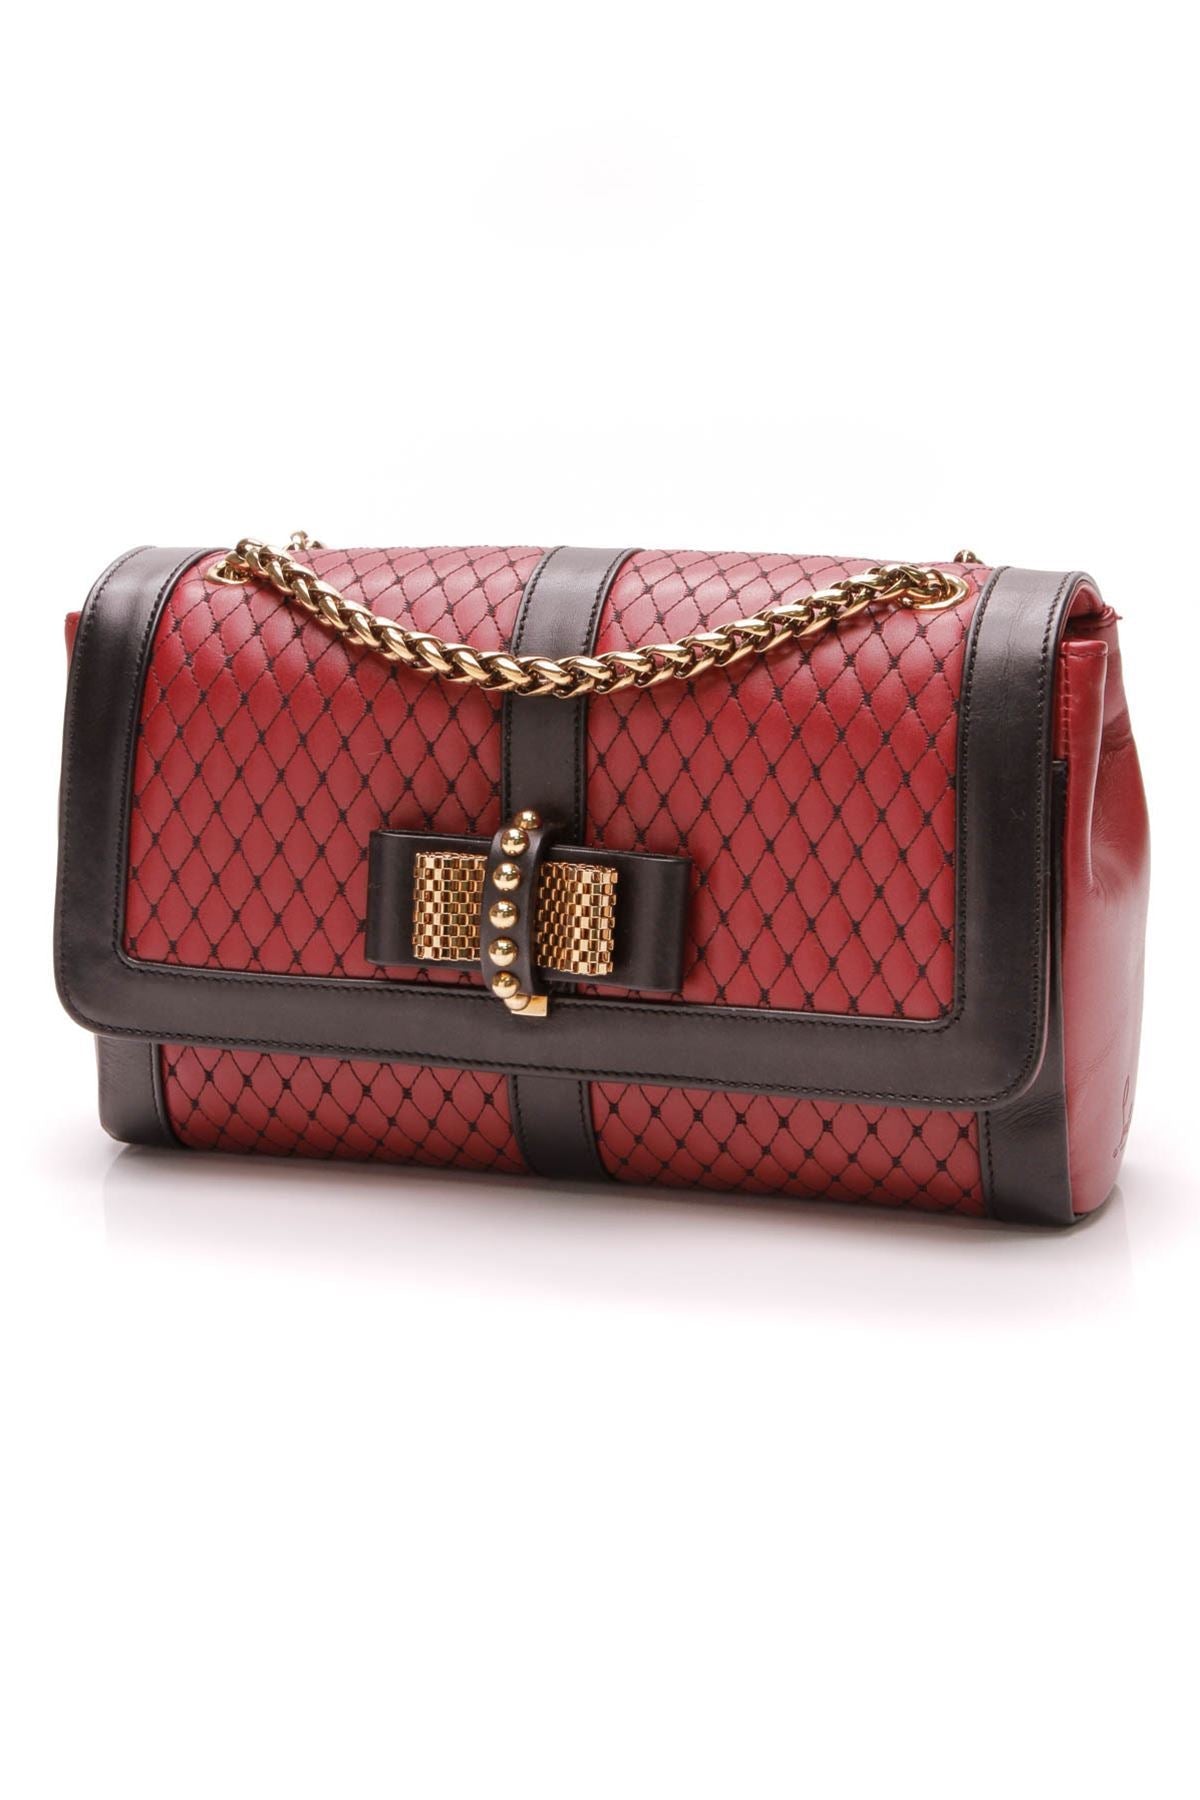 Sweet Charity Small Shoulder Bag - Red